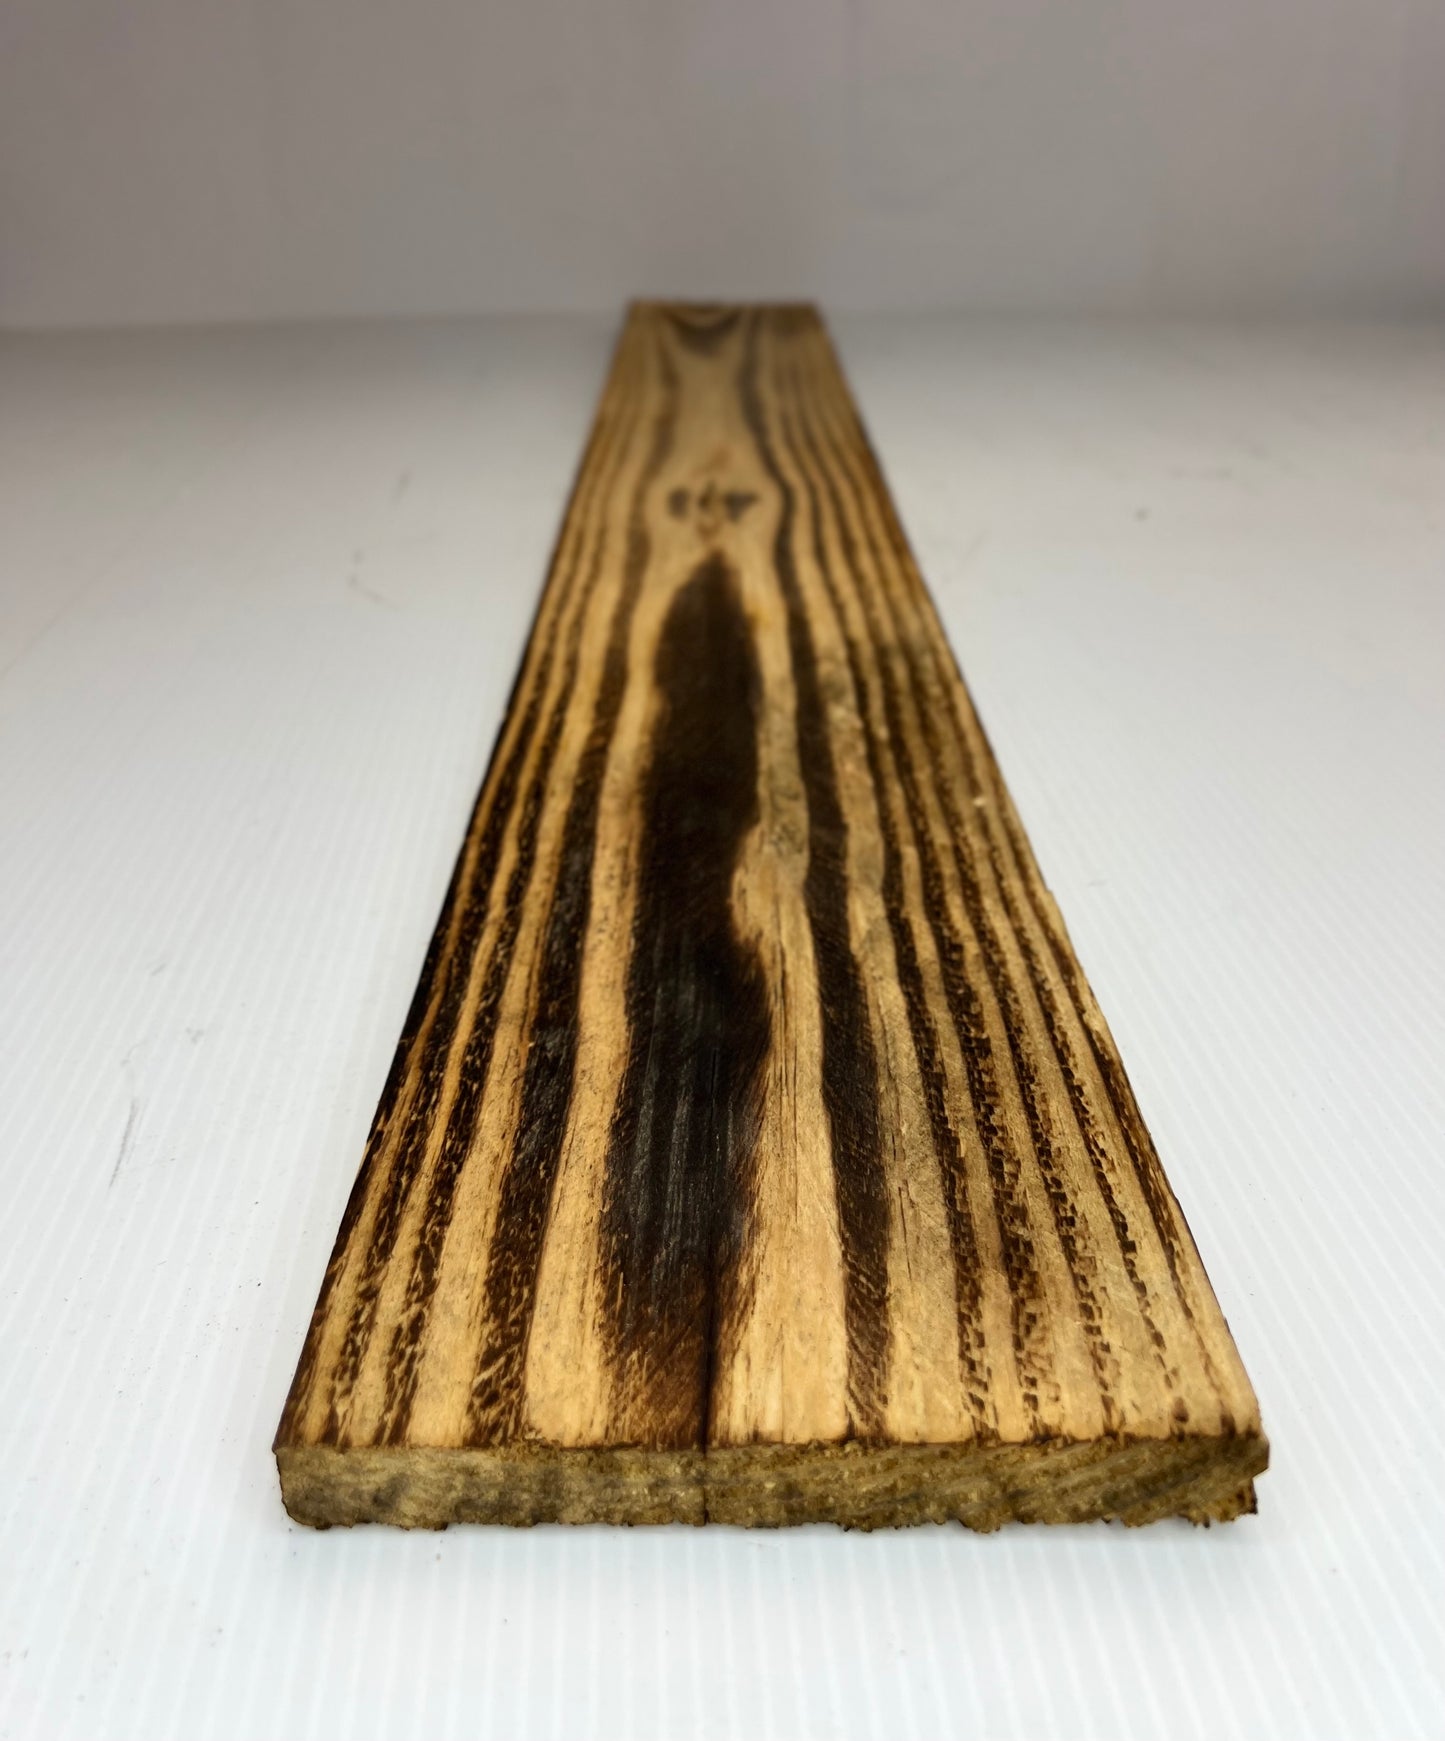 Torched Pine Boards (40" x 5.5" x 1/2")